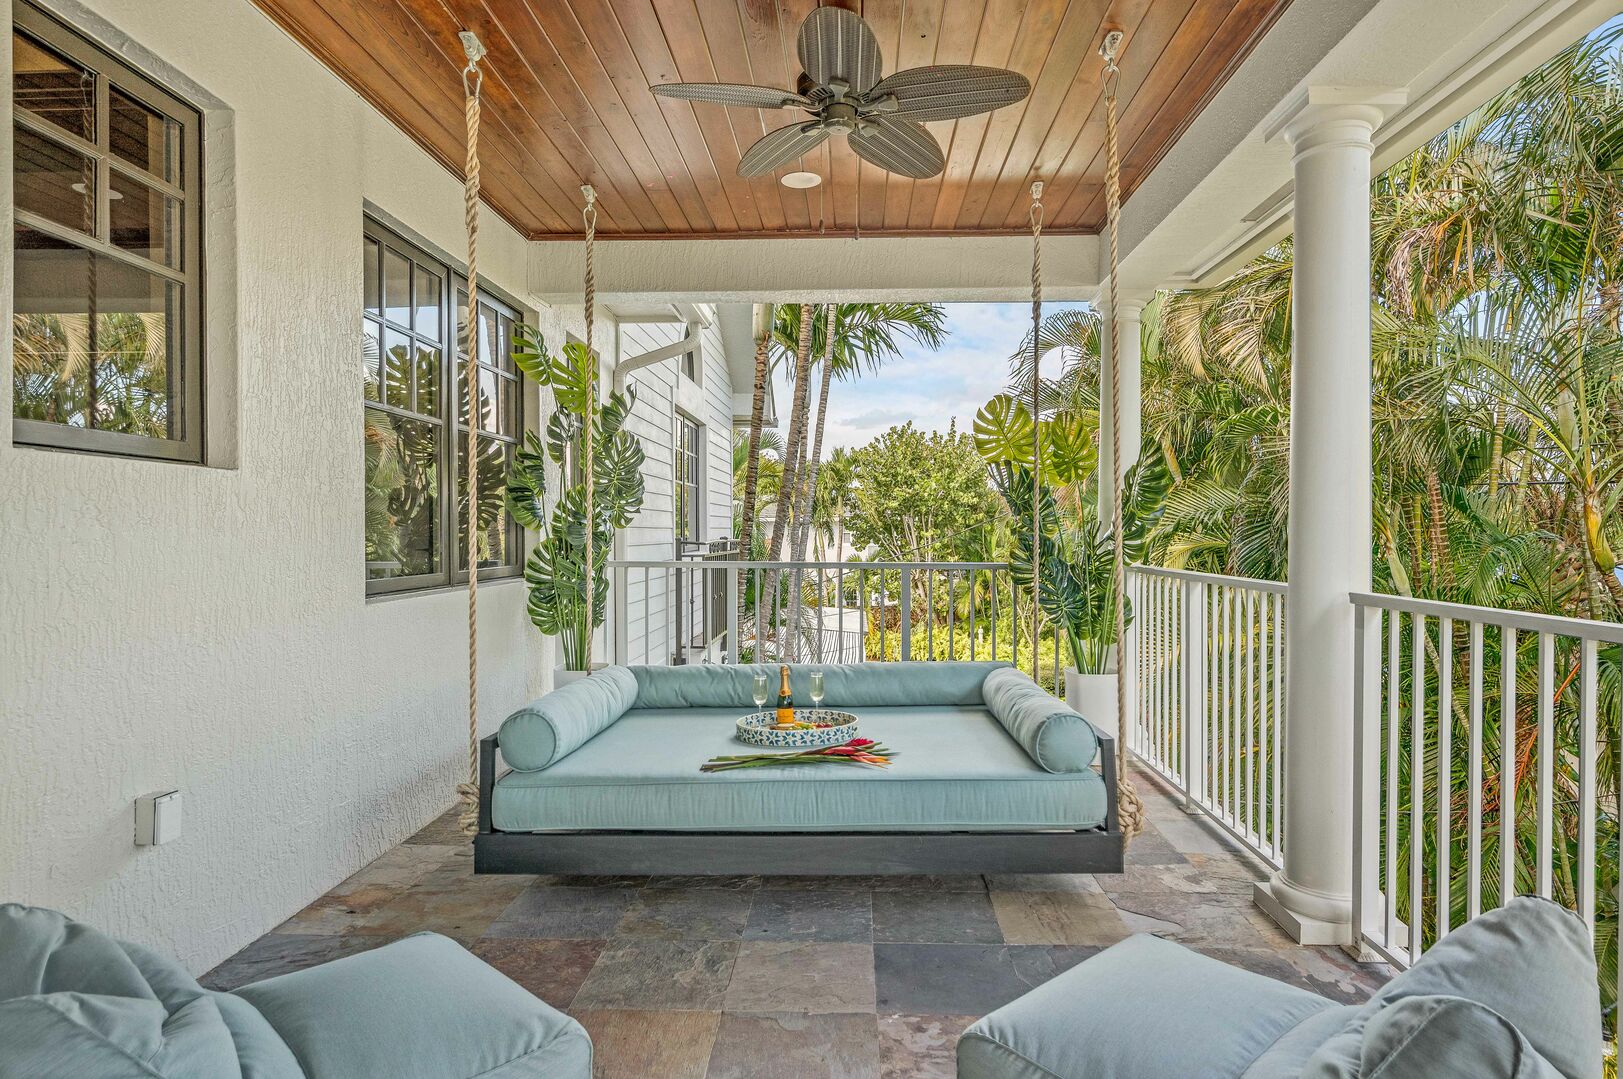 The veranda overlooks the heated pool and has its own private queen hanging bed by Nate and Lane.